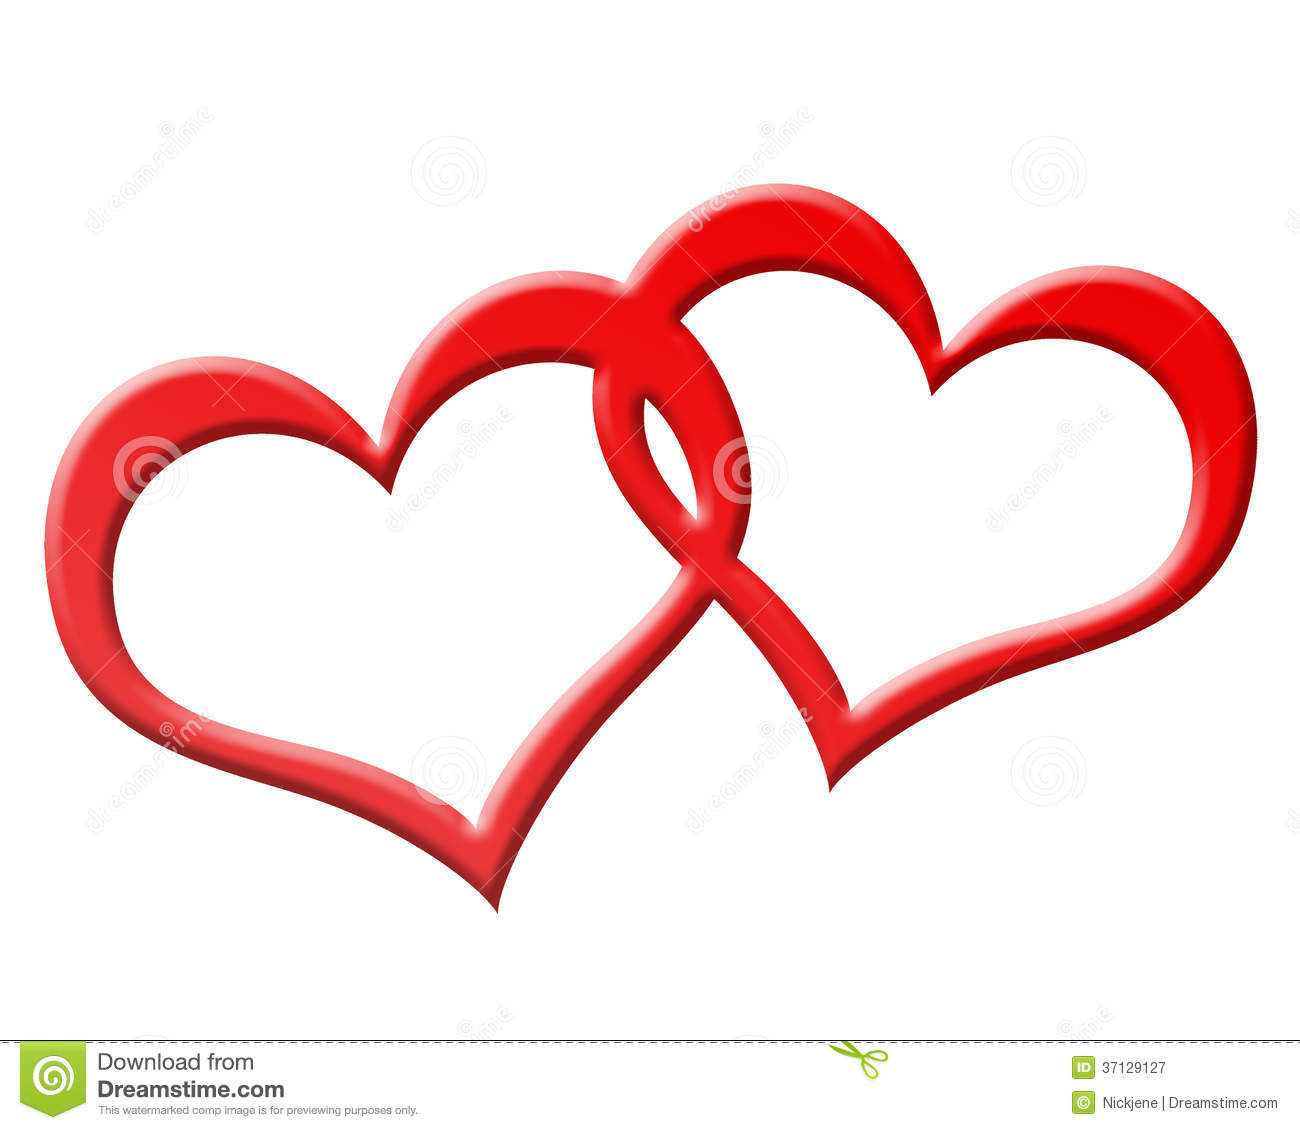 Two Red Hearts Joined Together Royalty Free Stock Photography   Image